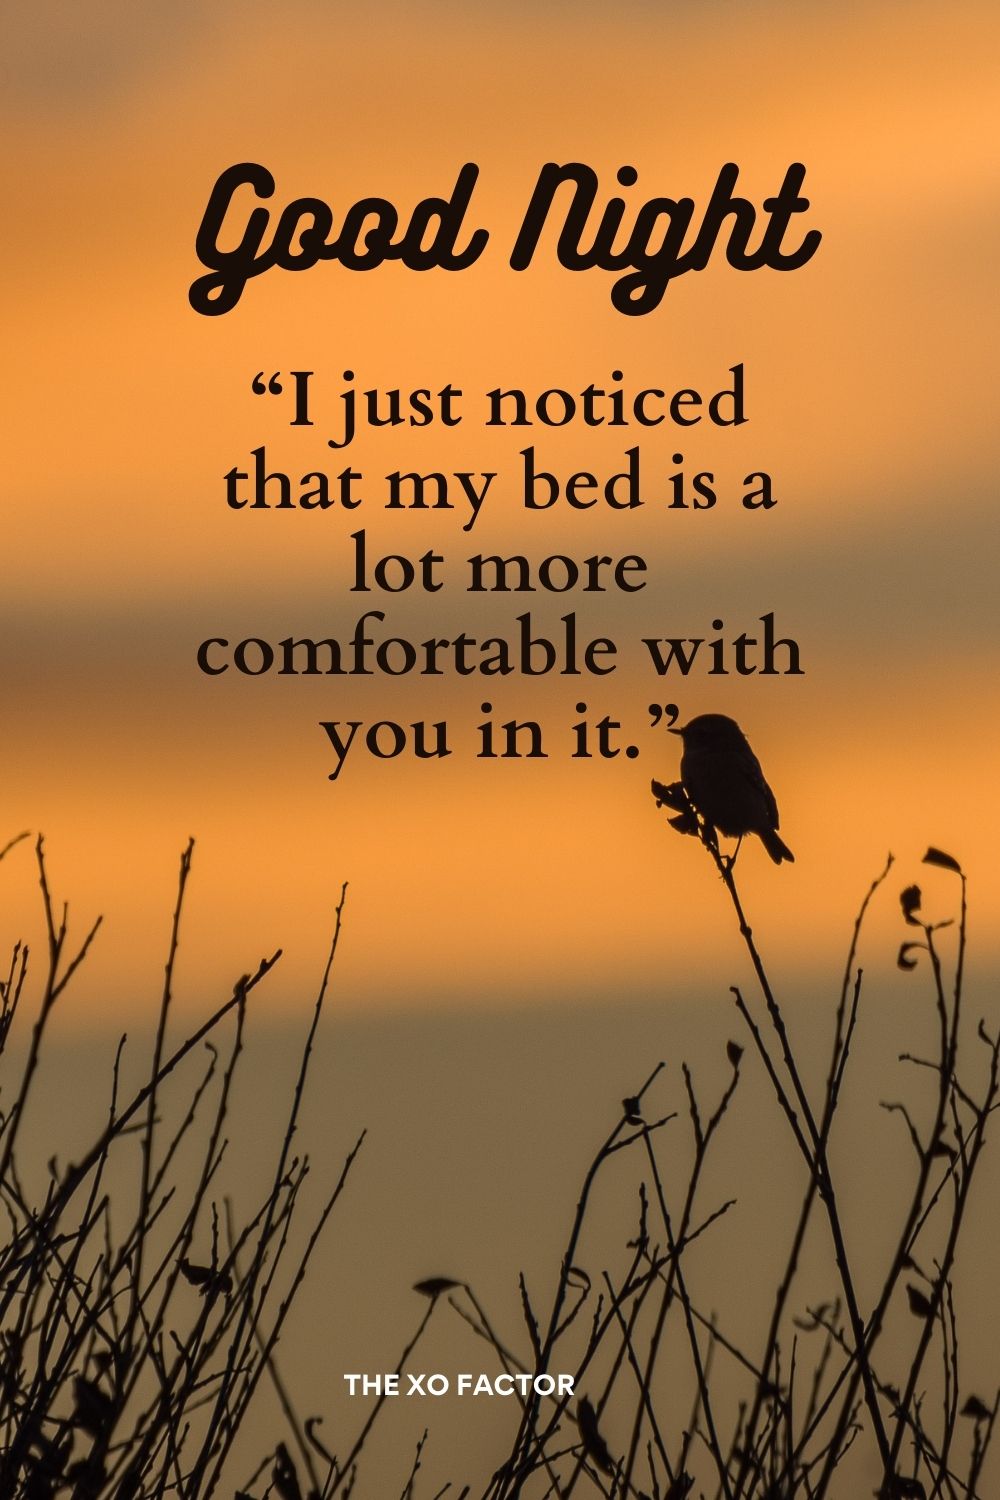 “I just noticed that my bed is a lot more comfortable with you in it.”